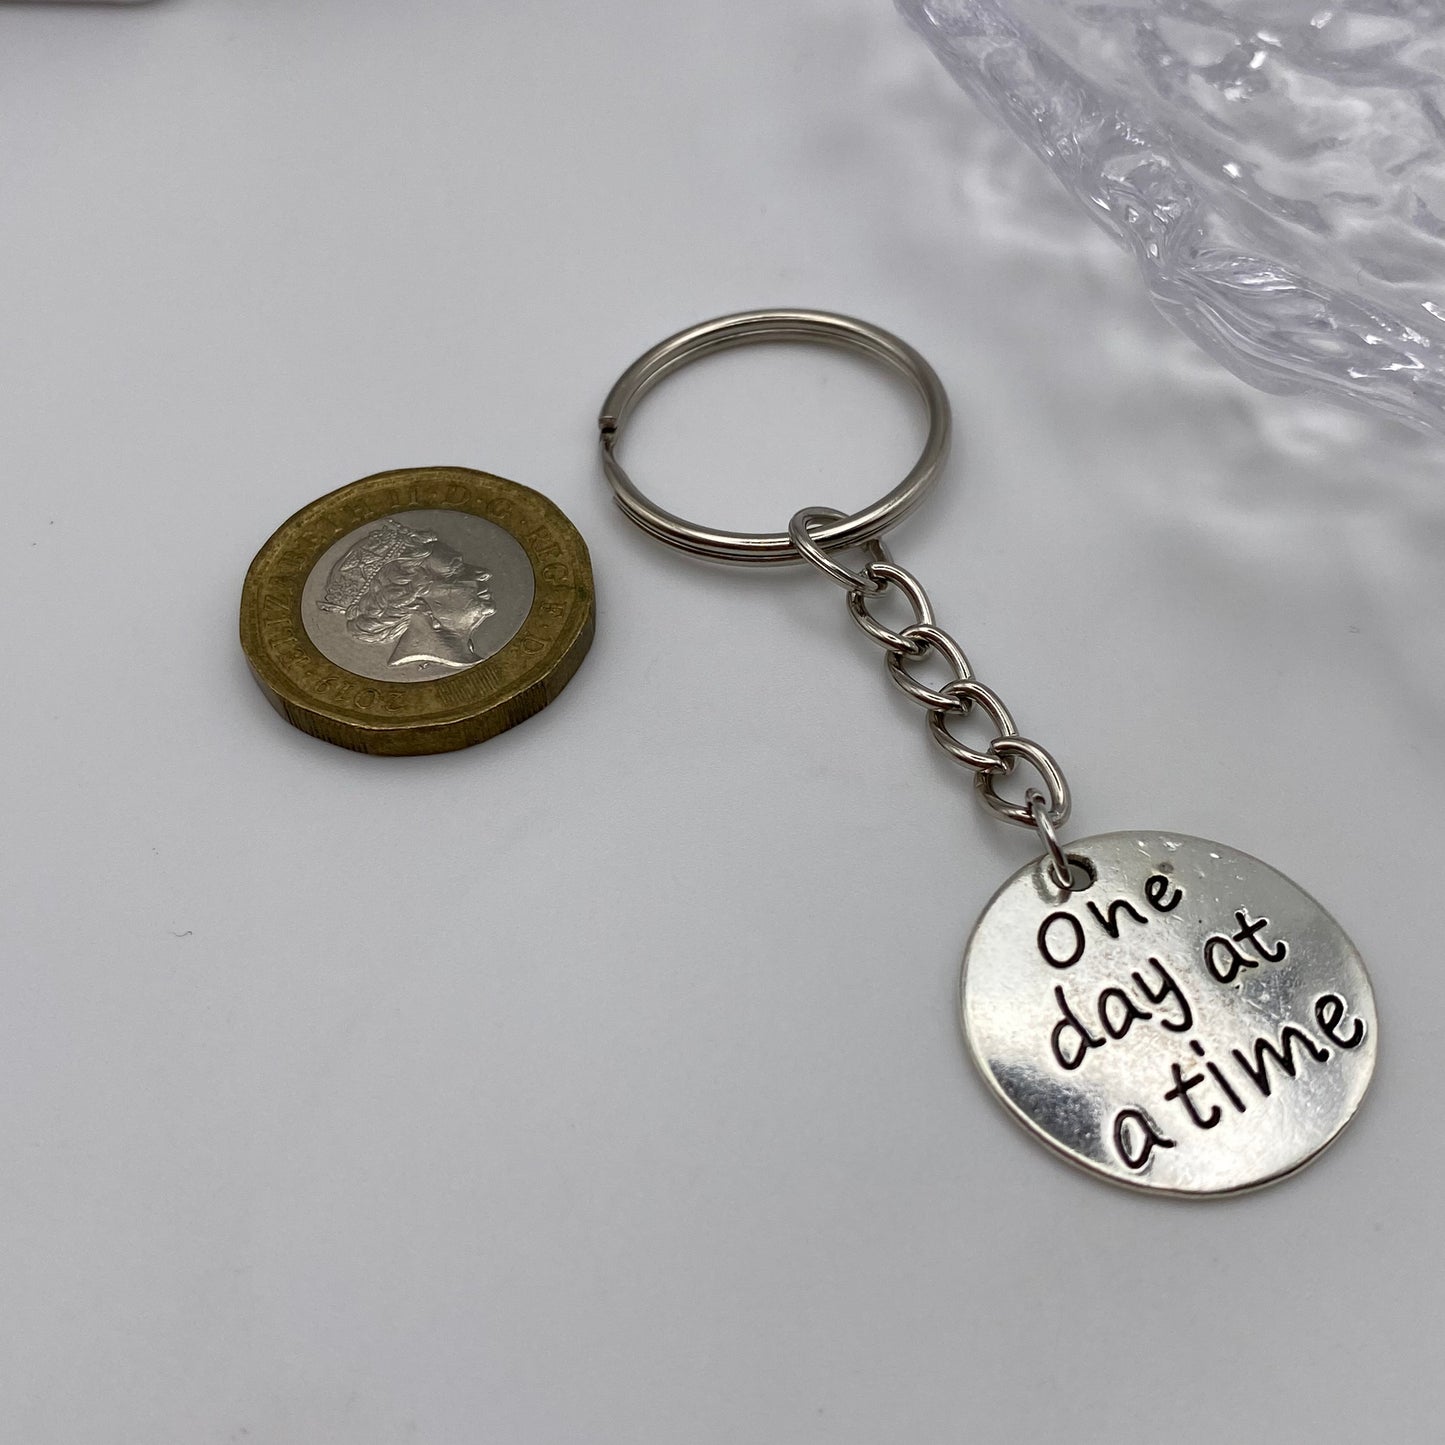 ‘One Day At A Time’ Keyring